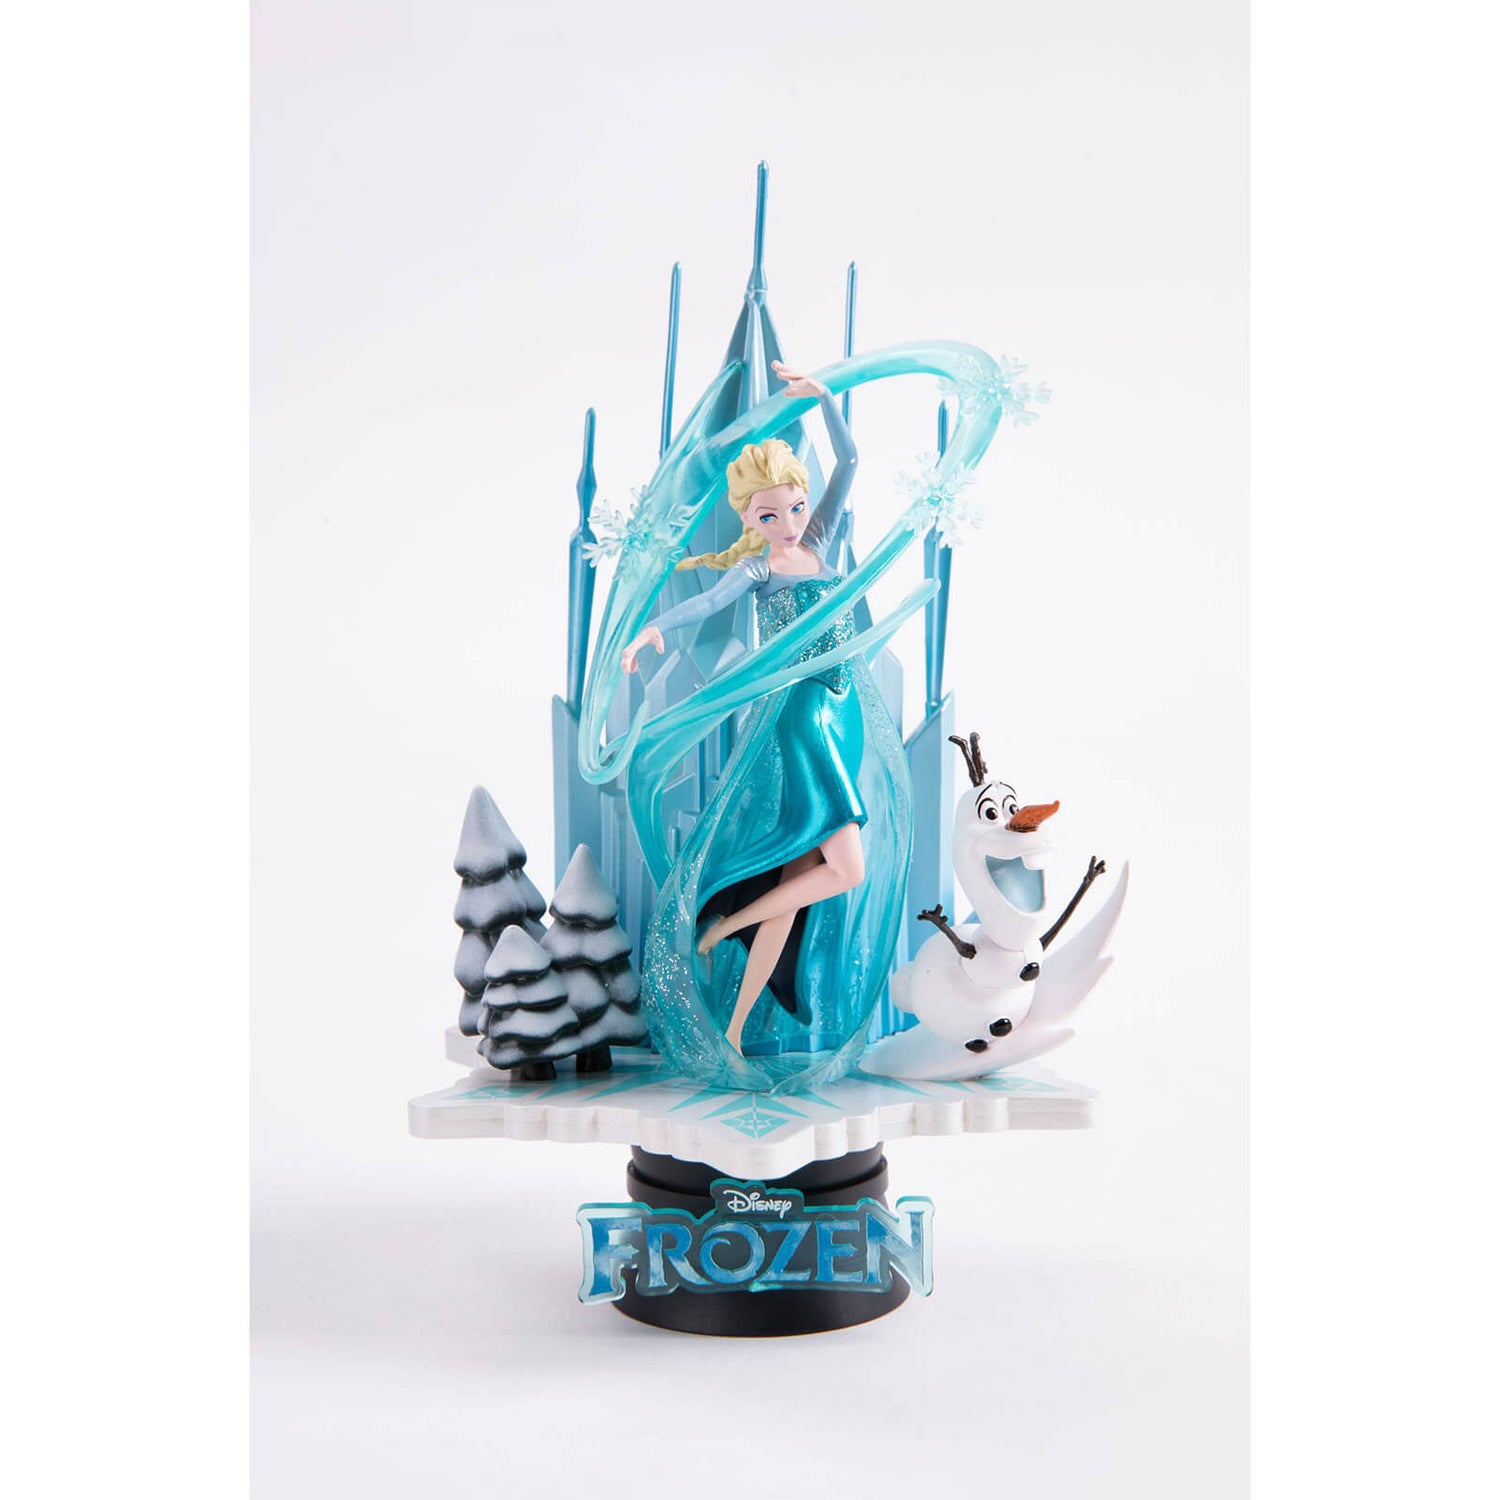 Beast Kingdom Frozen D-Select 18cm Diorama Statue Special Edition